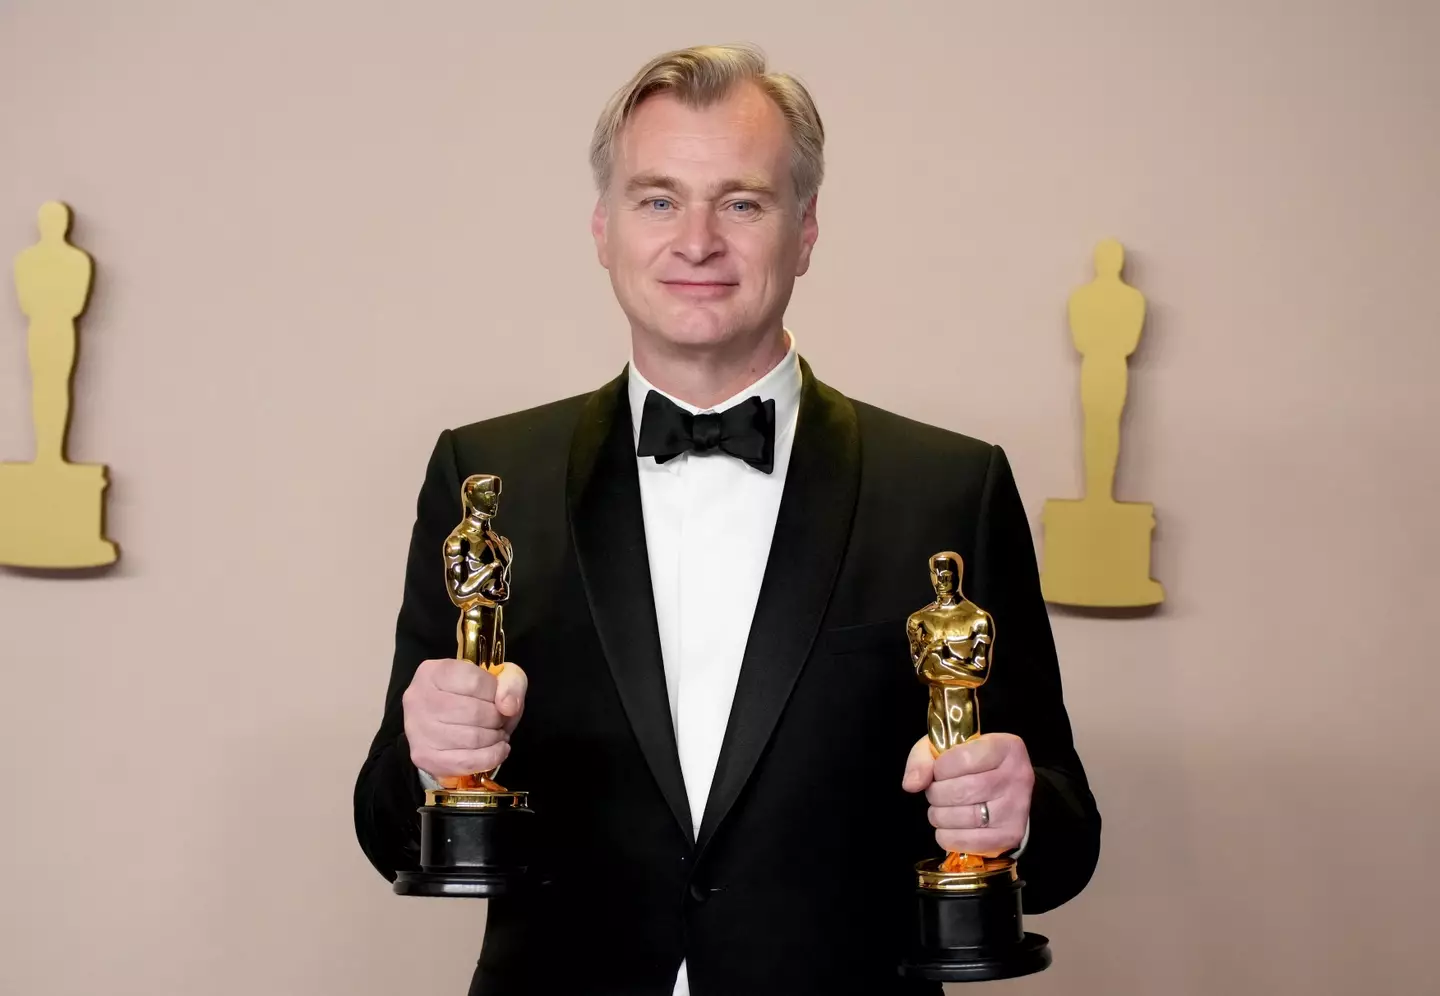 The director took home two Oscars for Oppenheimer on Sunday night.